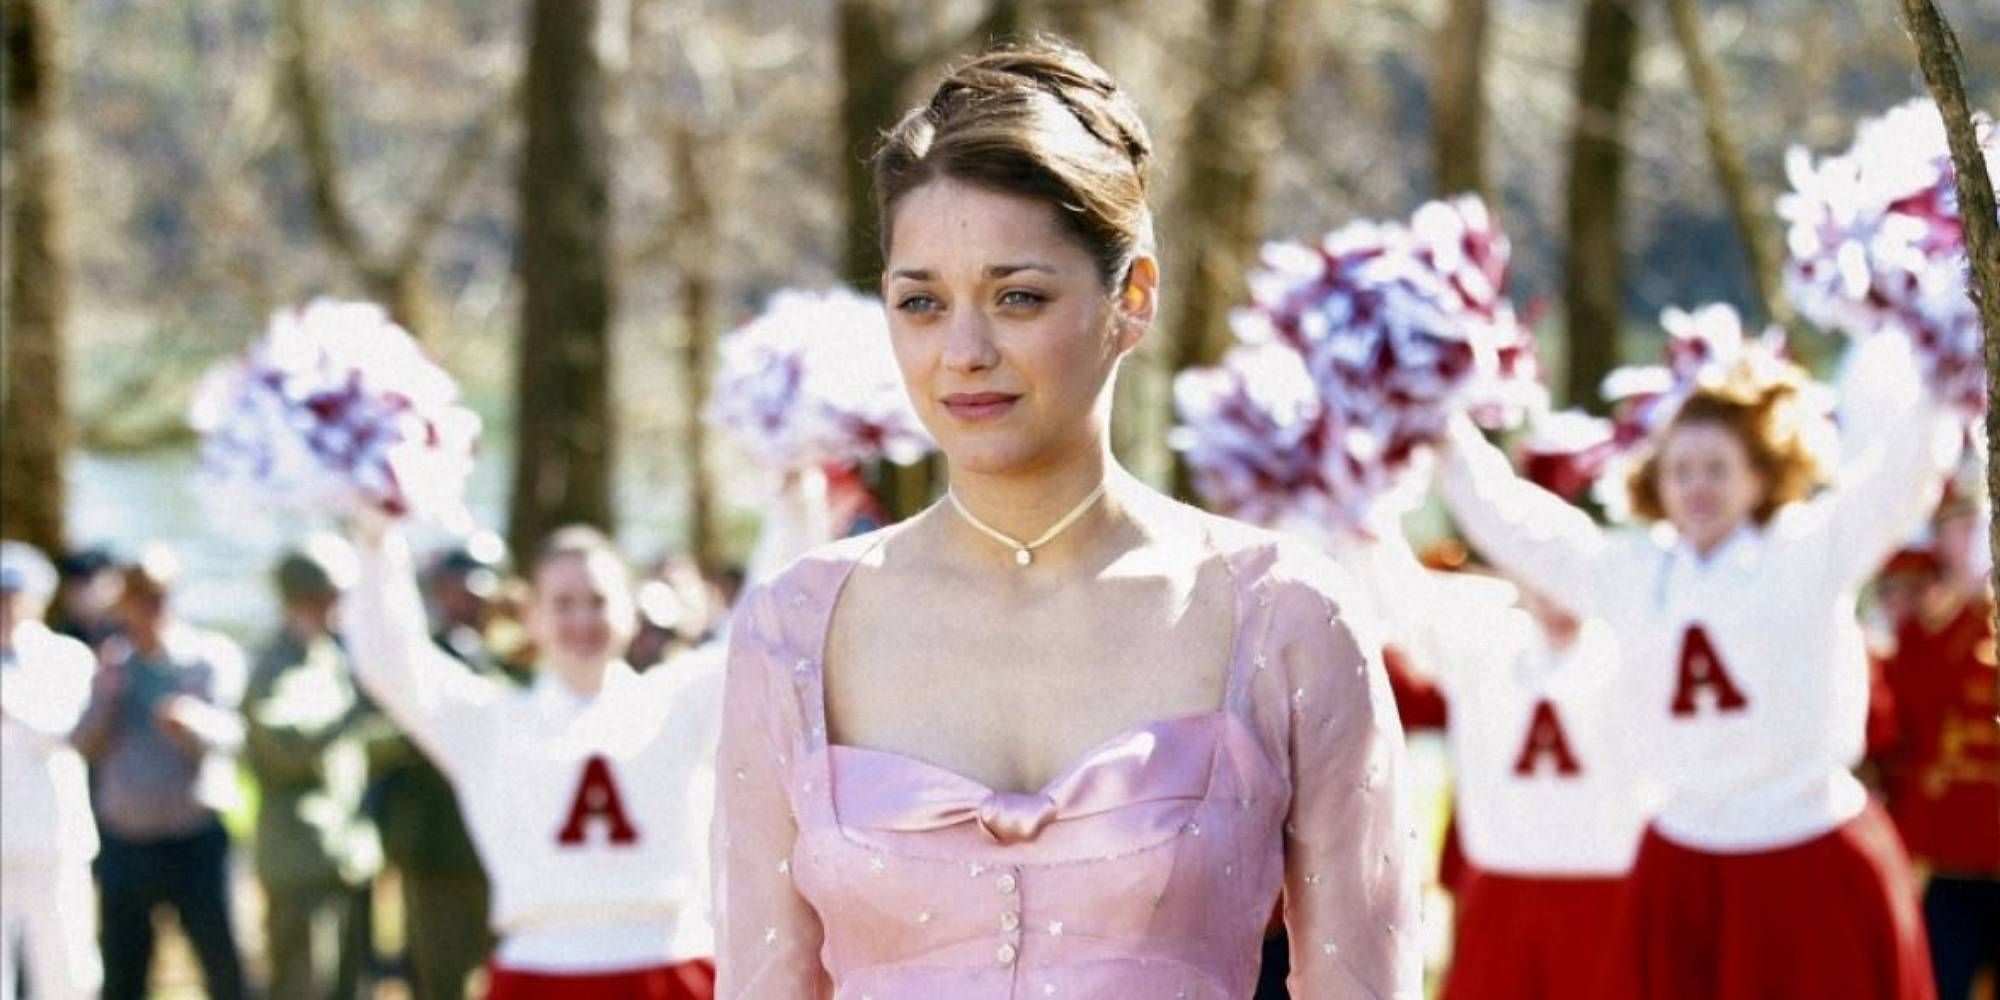 Marion Cotillard in Big Fish surrounded by cheerleaders.